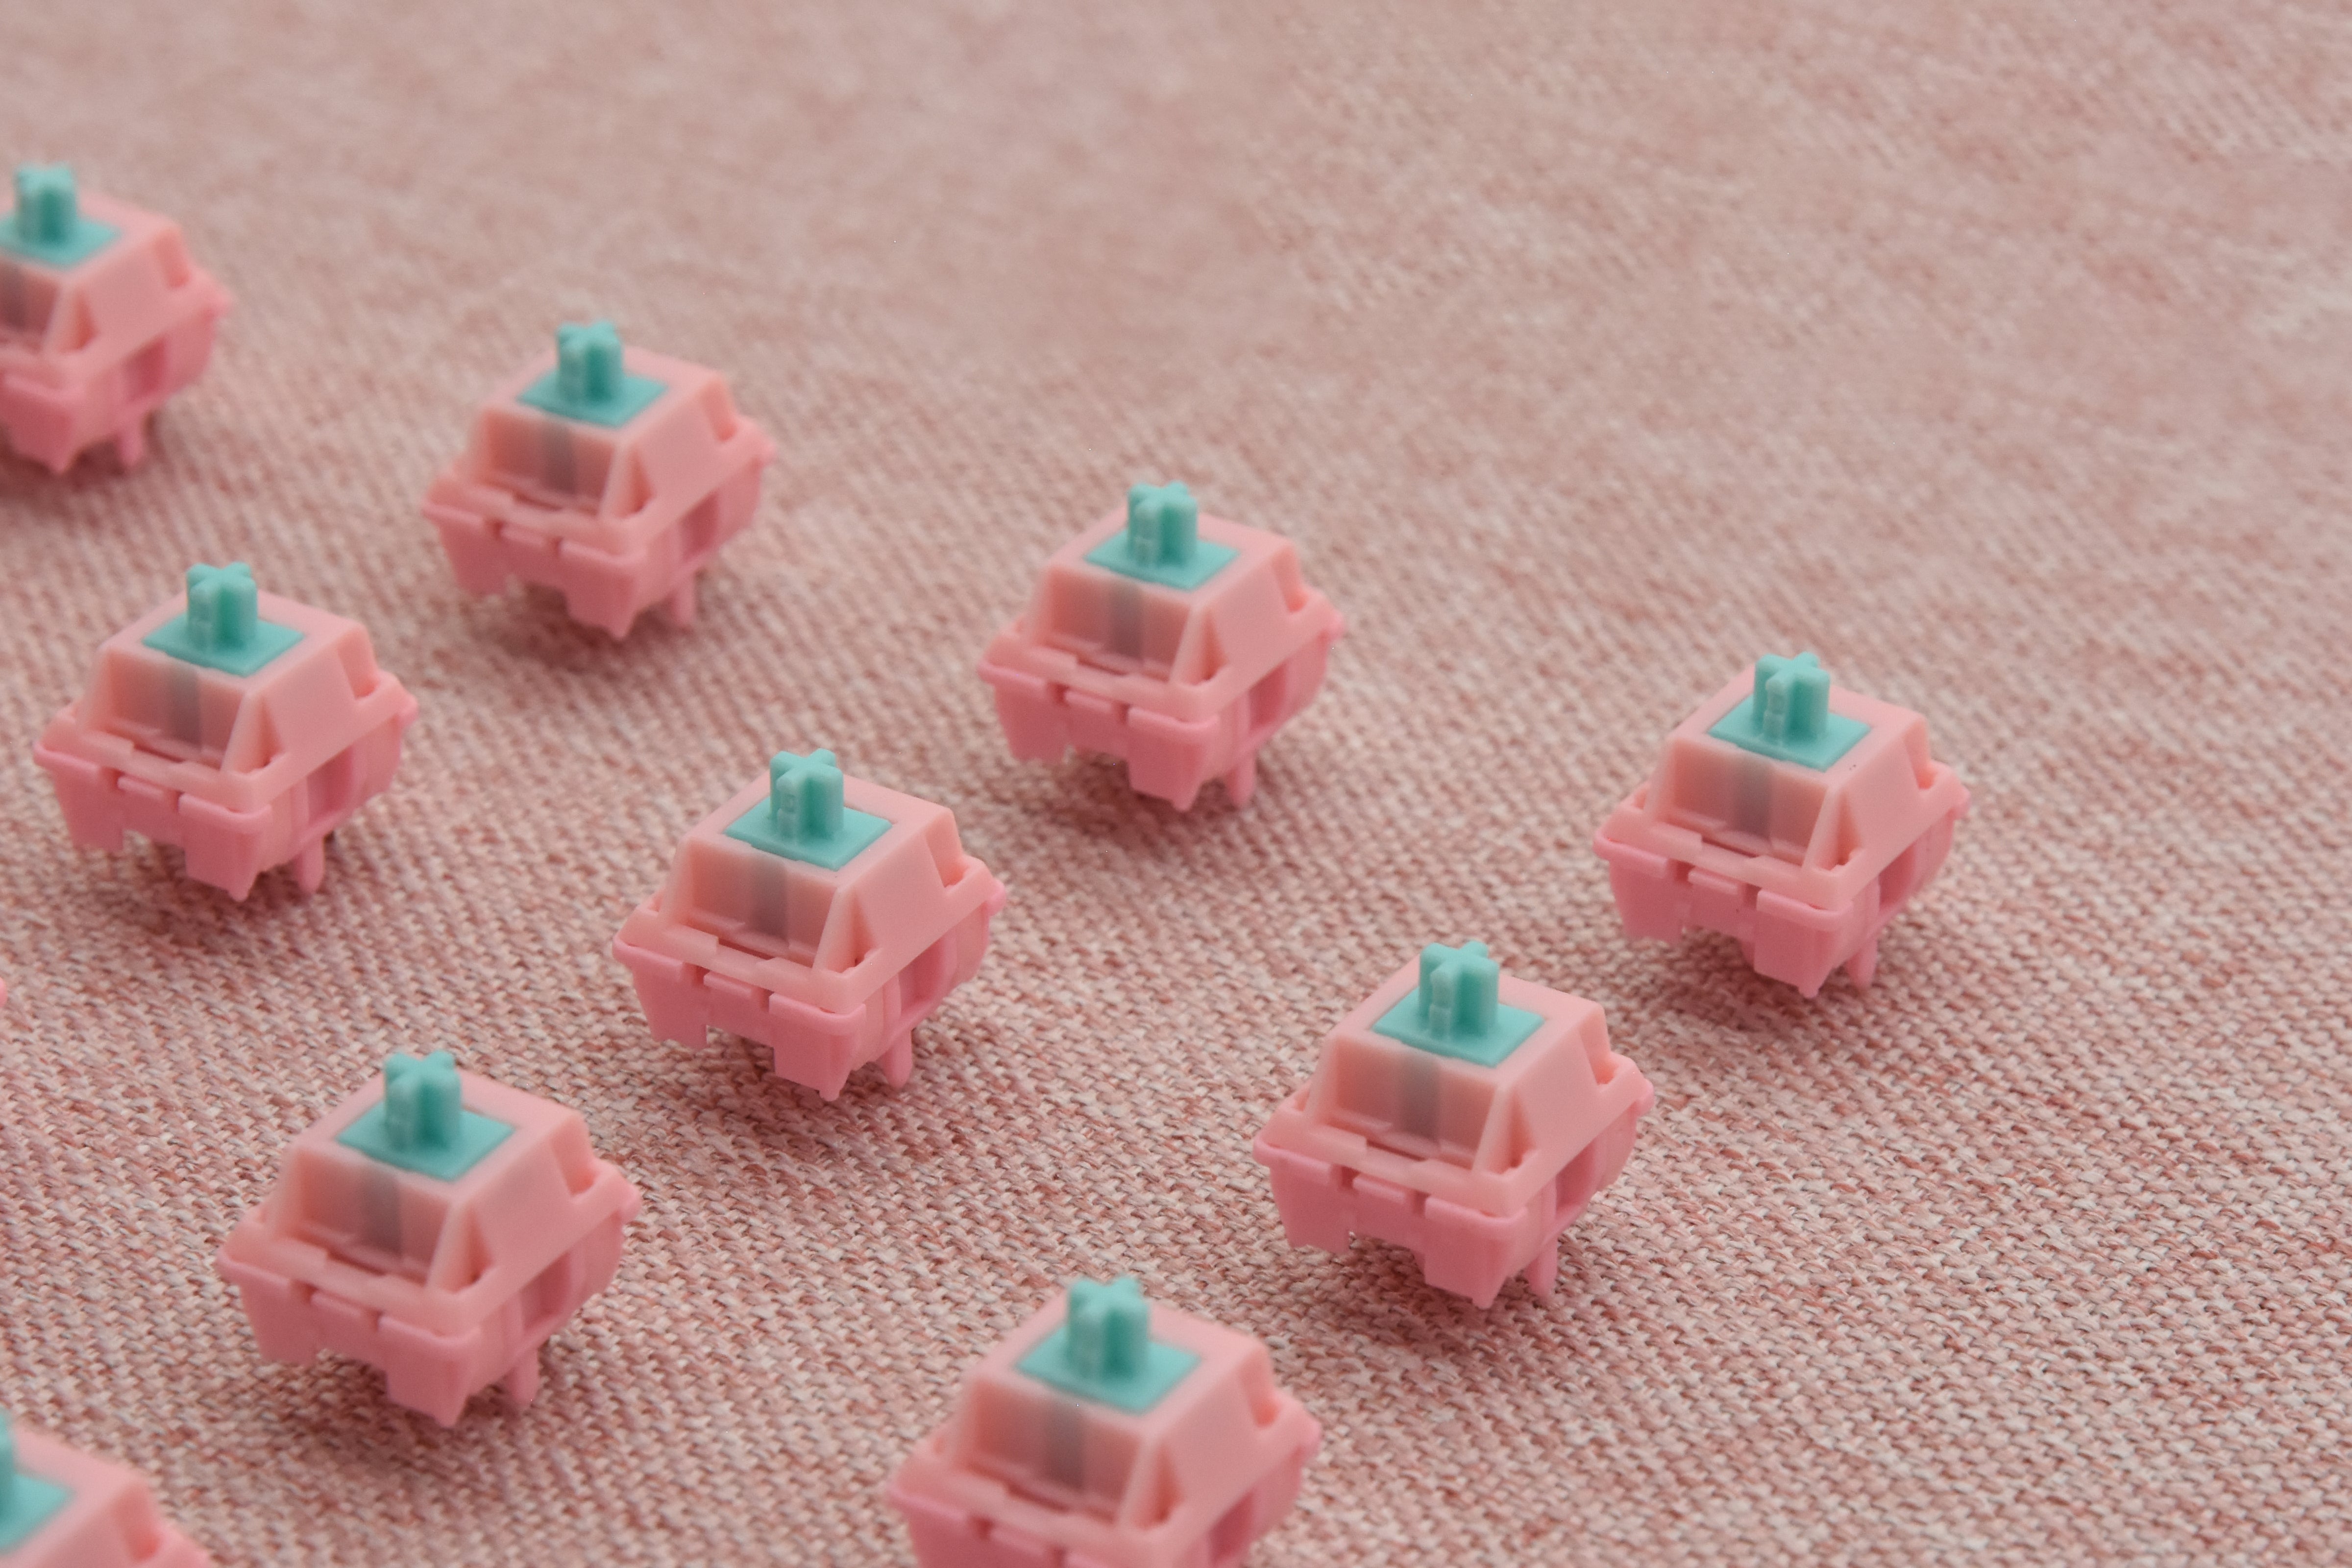 GRAIN GOLD STRAWBERRY BUBBLE GUM LINEAR SWITCH FACTORY LUBED EDITION (10PCS)